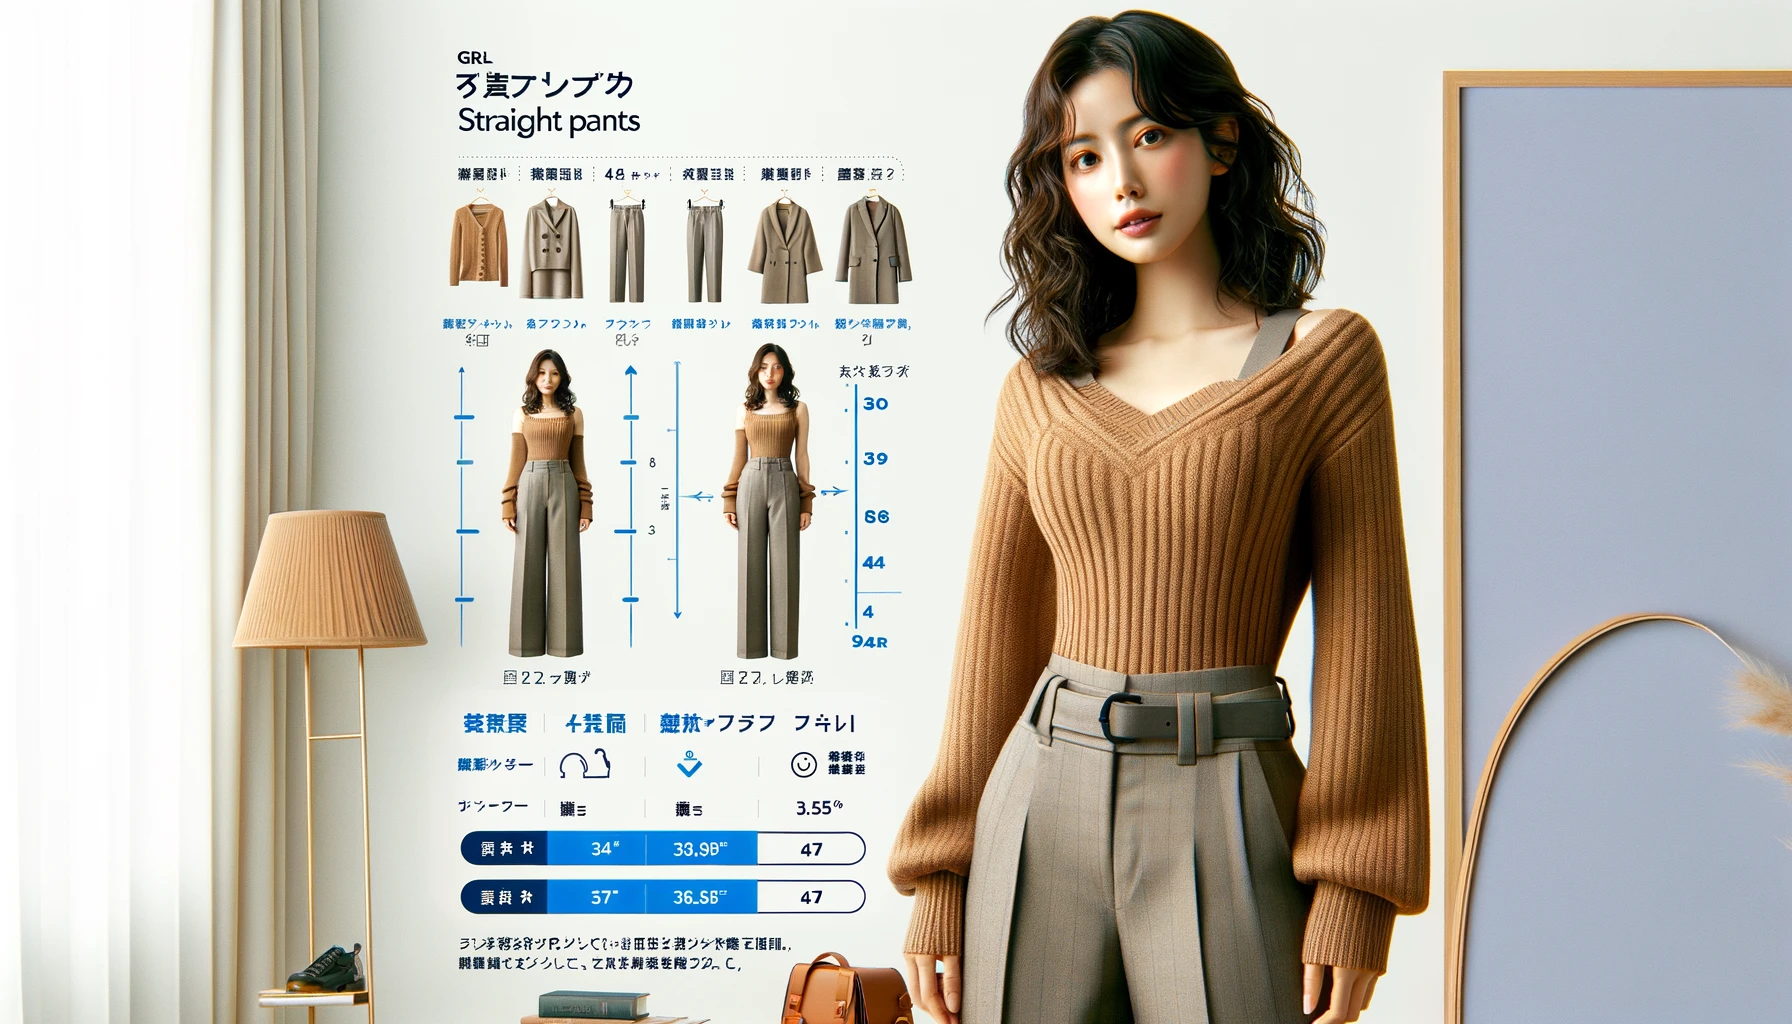 An image showcasing size options for straight pants from GRL (Grail), a women's budget-friendly fashion brand. The image features a stylish Japanese woman modeling straight pants in various sizes. There are visual size charts, measurement tips, and guidance on choosing the right size. The background is a simple, modern design with fashion-related icons.